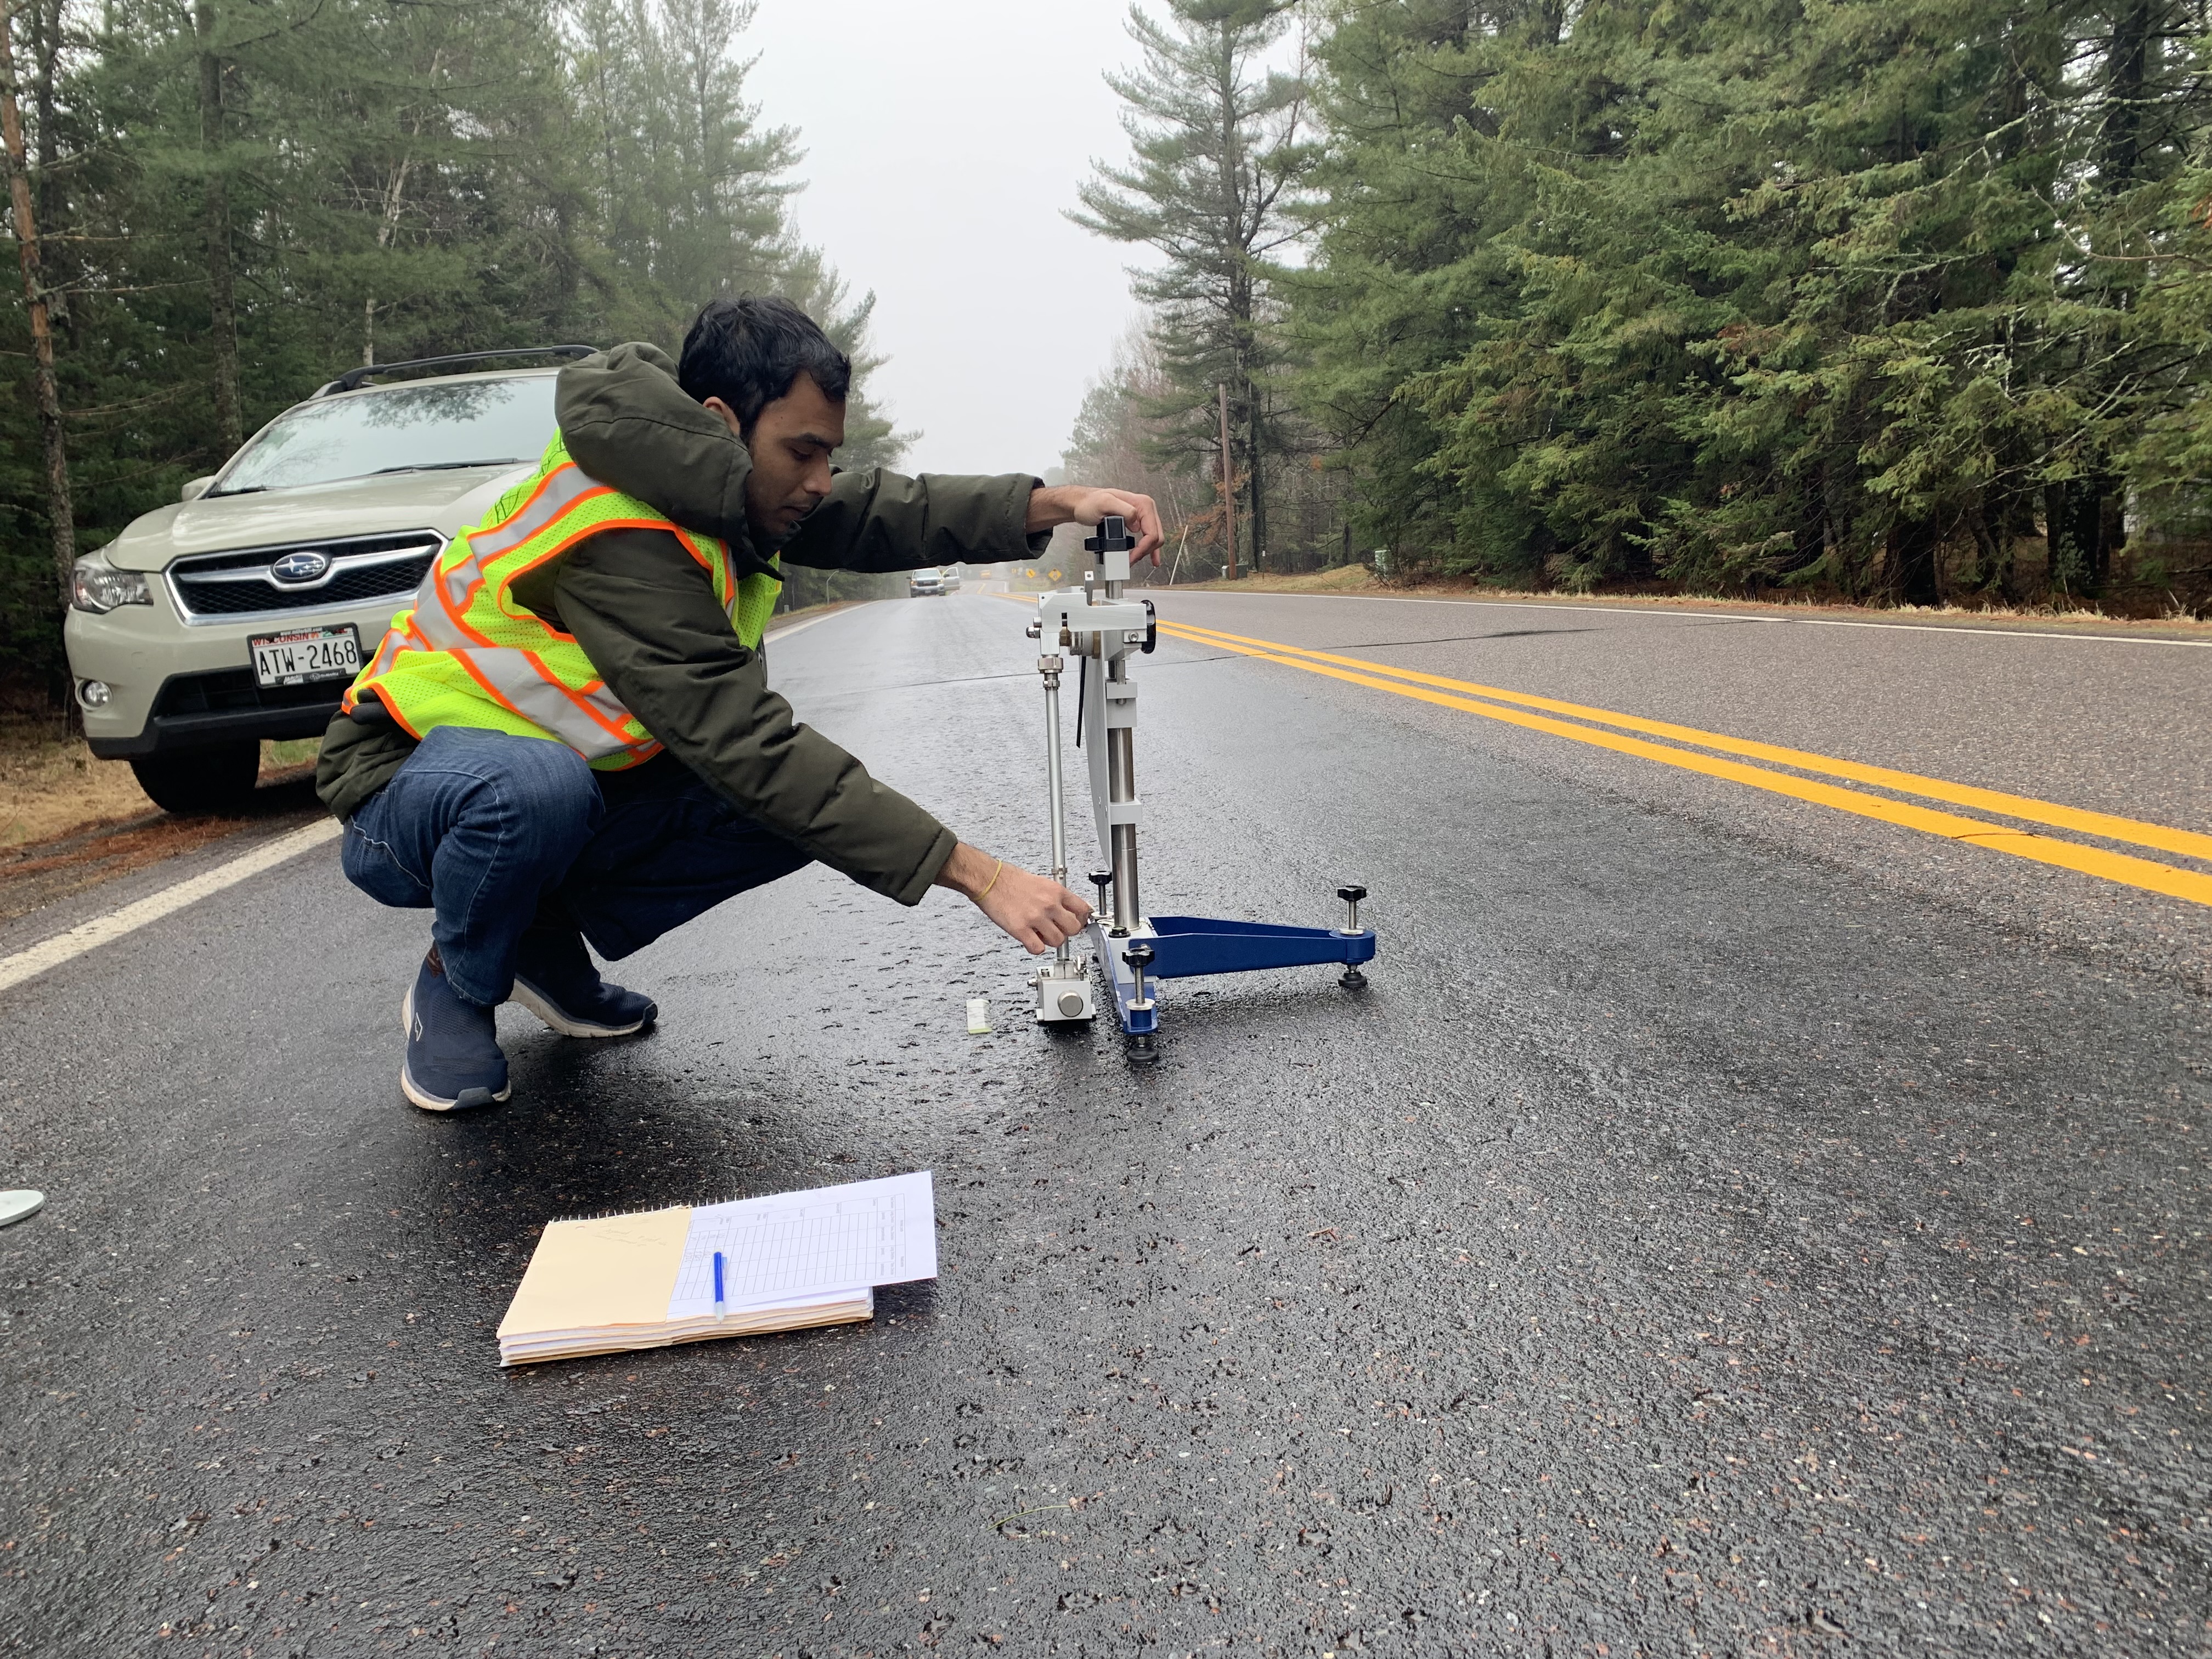 A man in a safety vest crouches on a road holding up a testing apparatus.